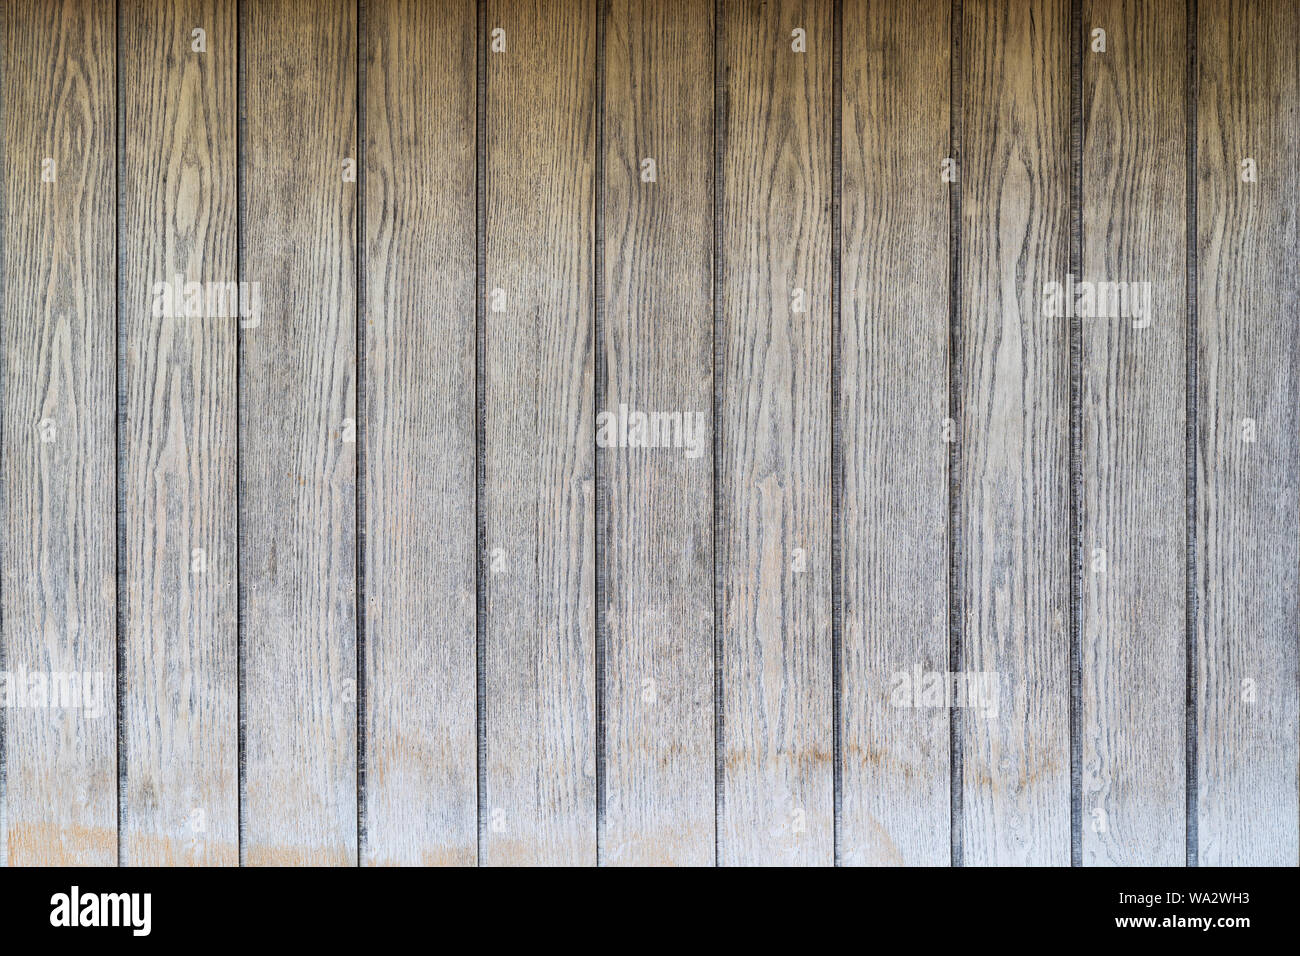 Vintage wood wall texture. Old wood with pattern background. Stock Photo